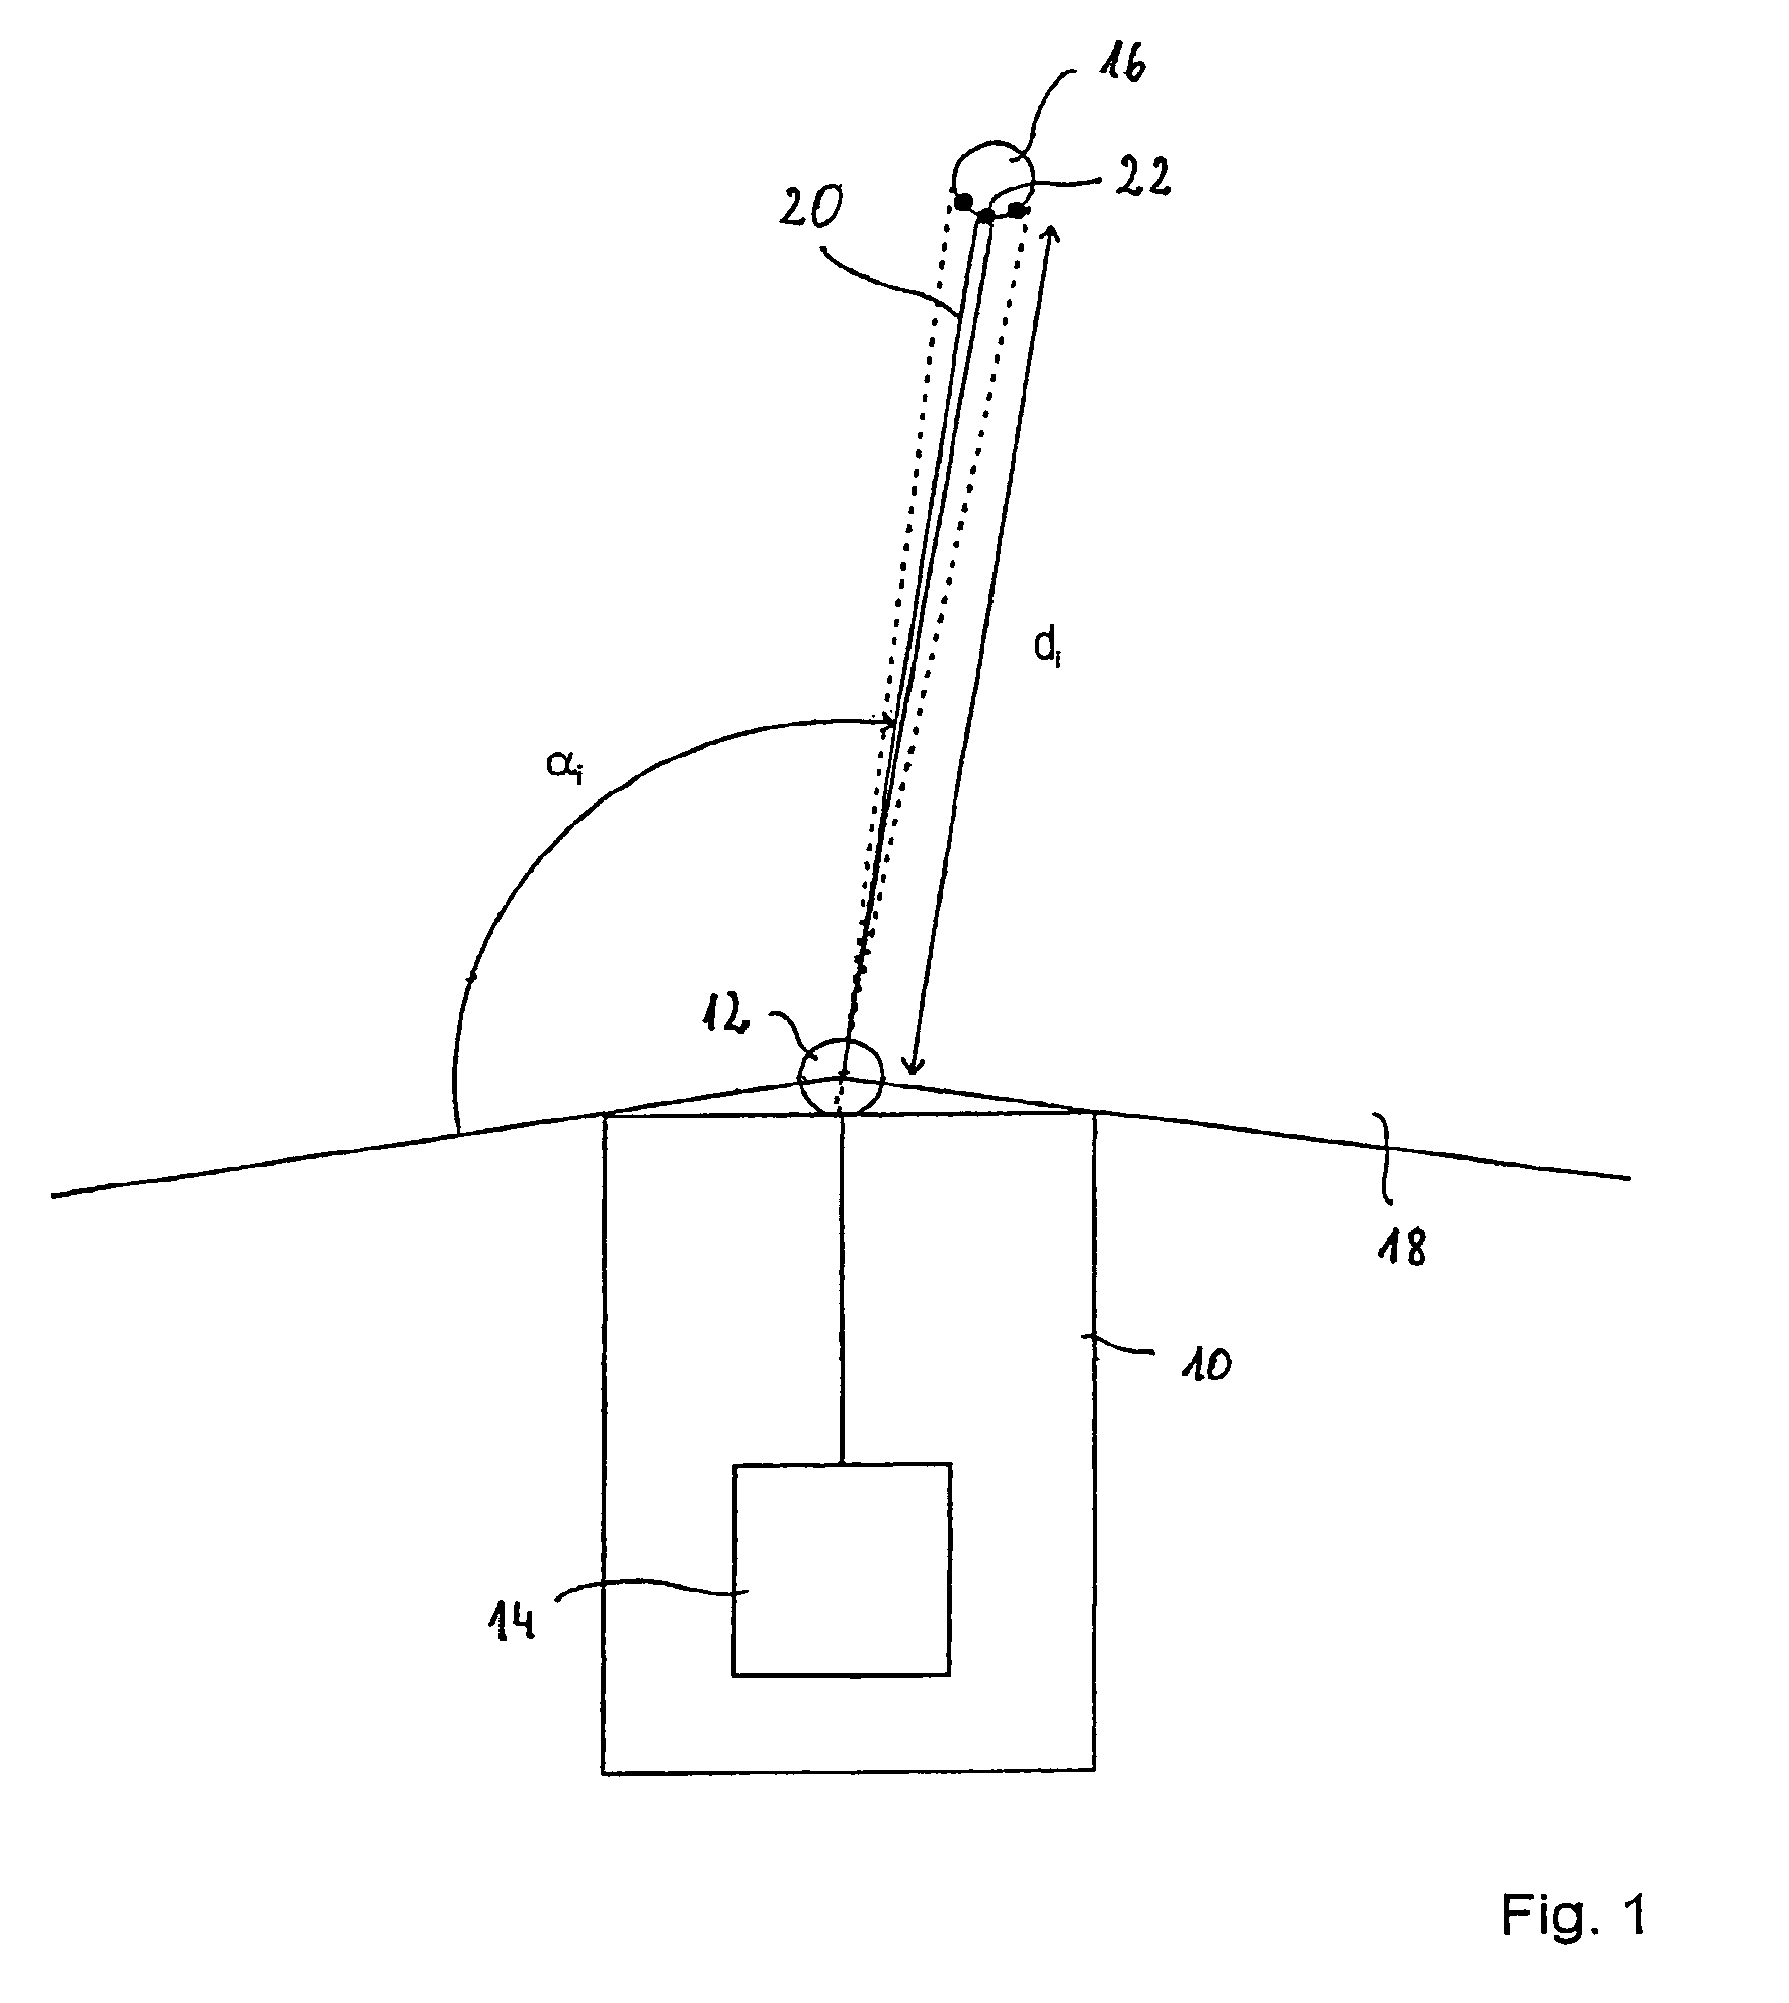 Method of recognizing and/or tracking objects